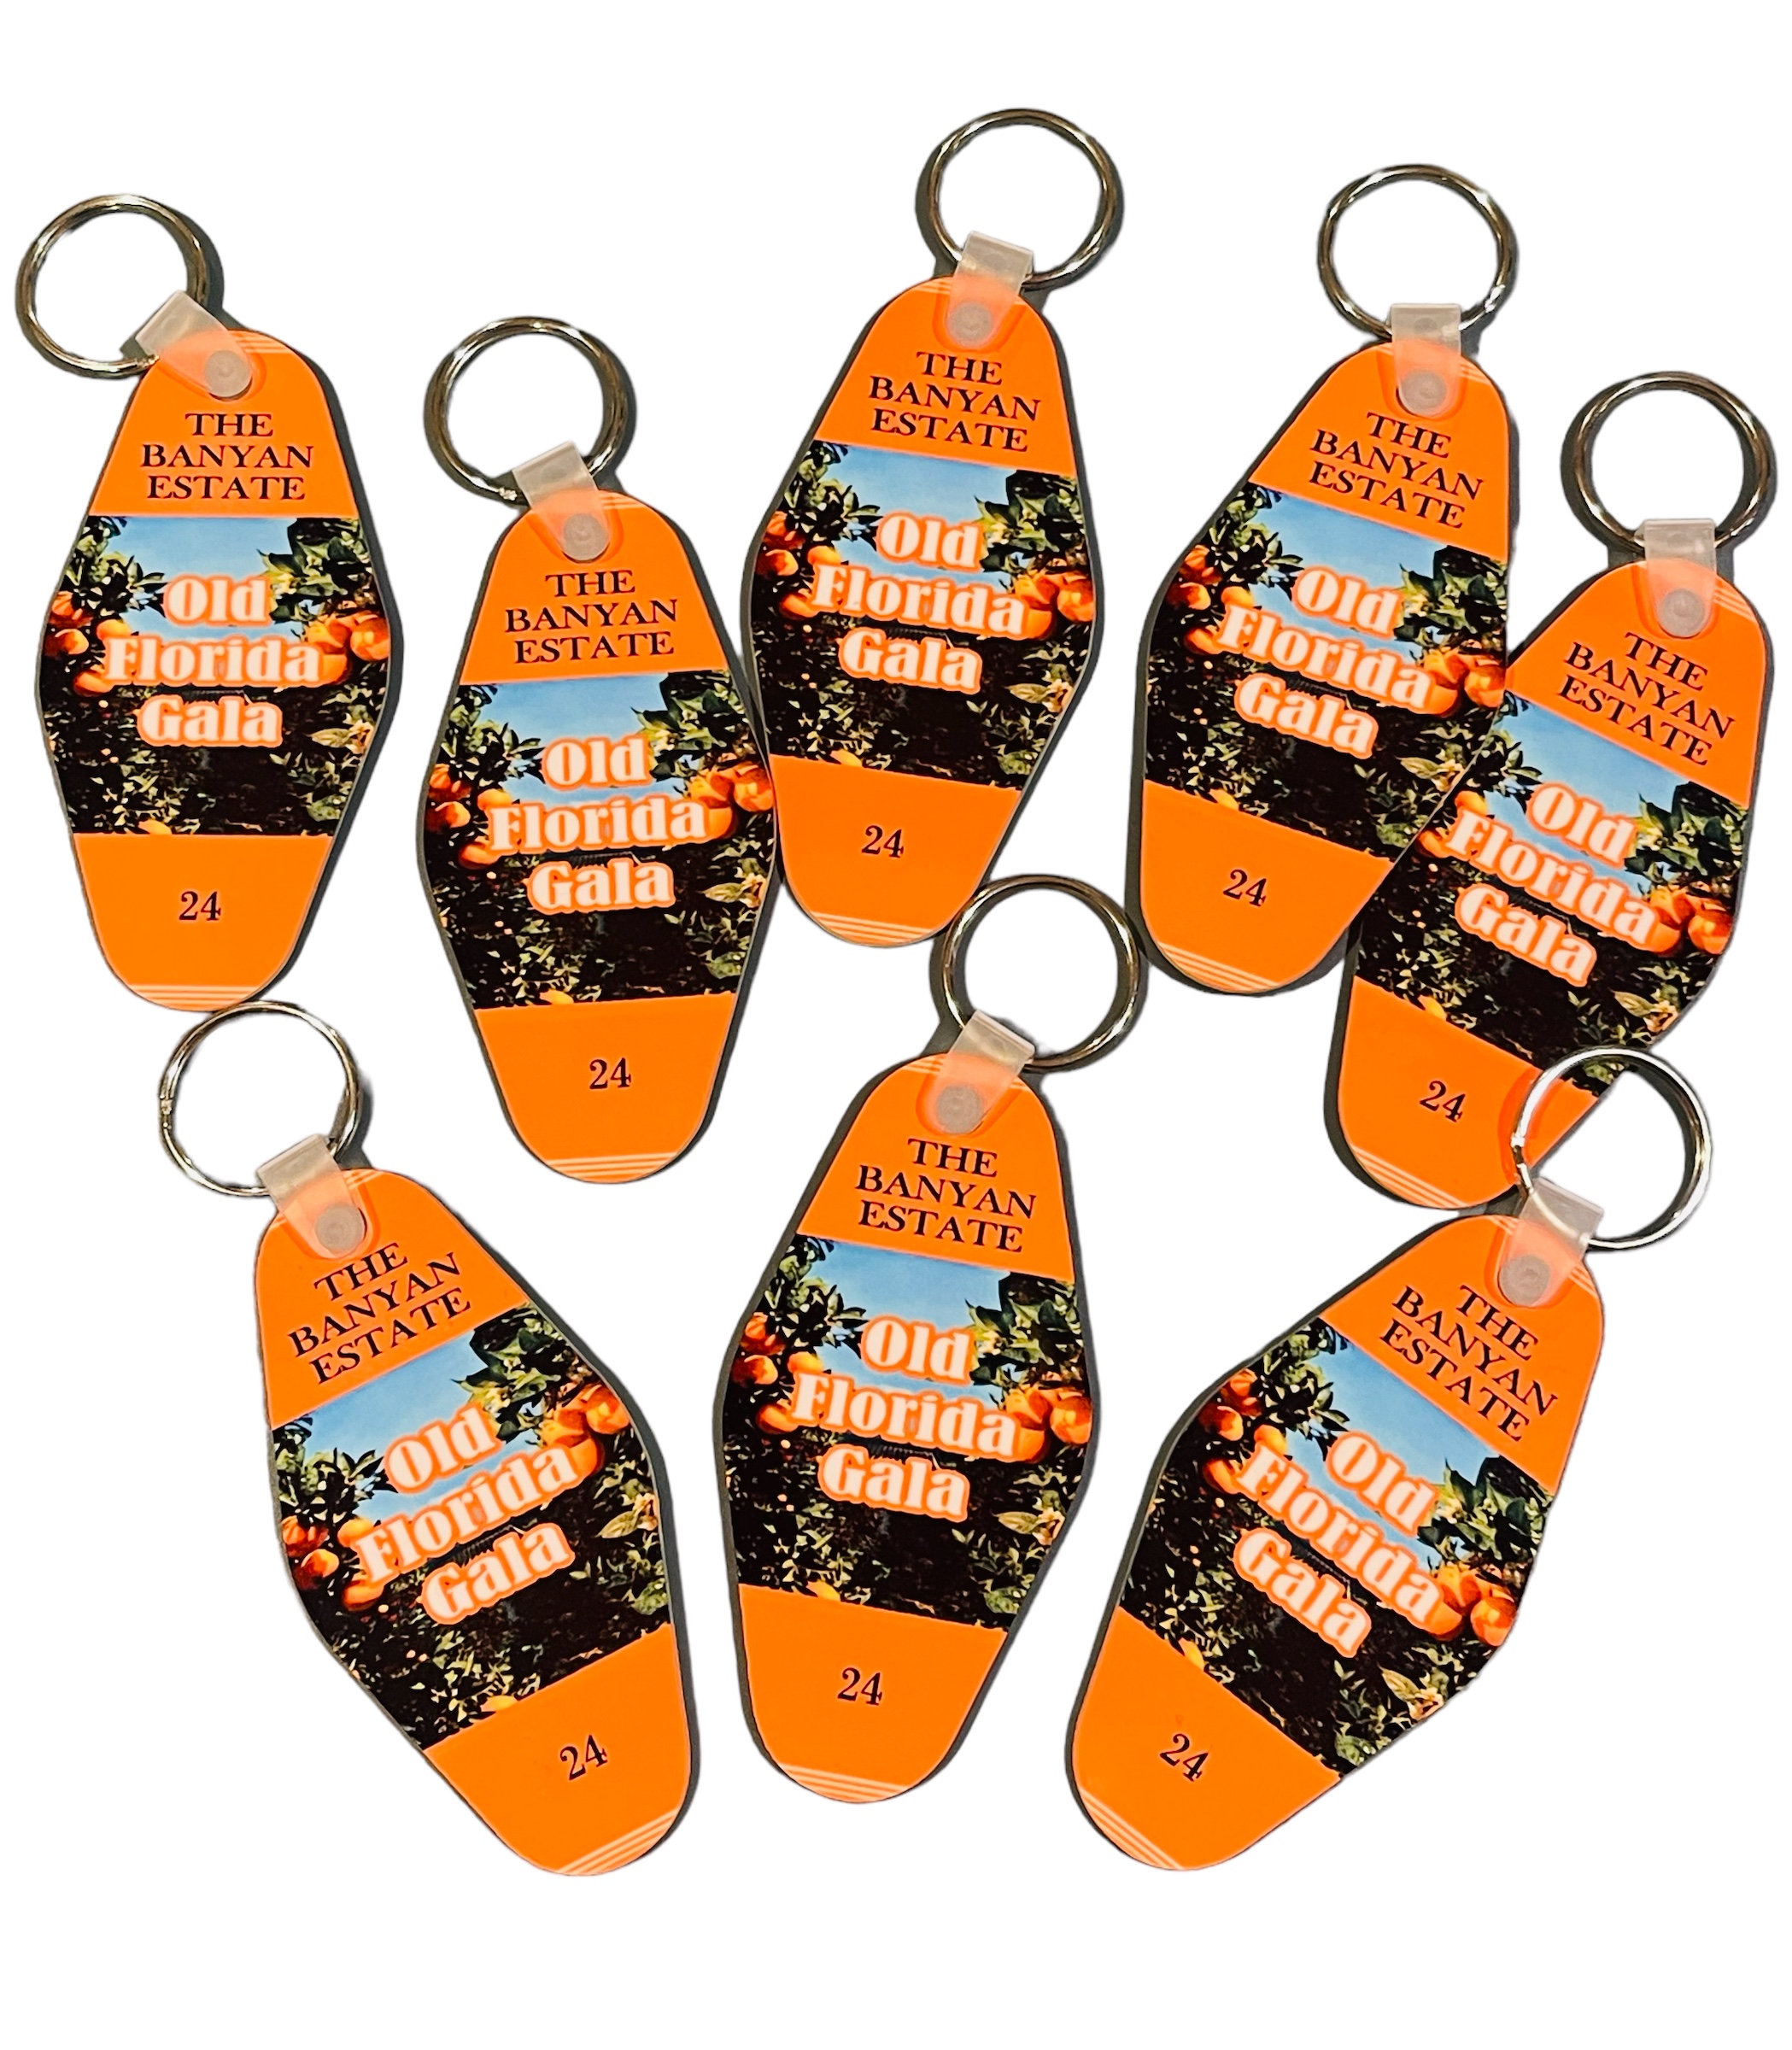 Vintage Hotel Keychain made with sublimation printing